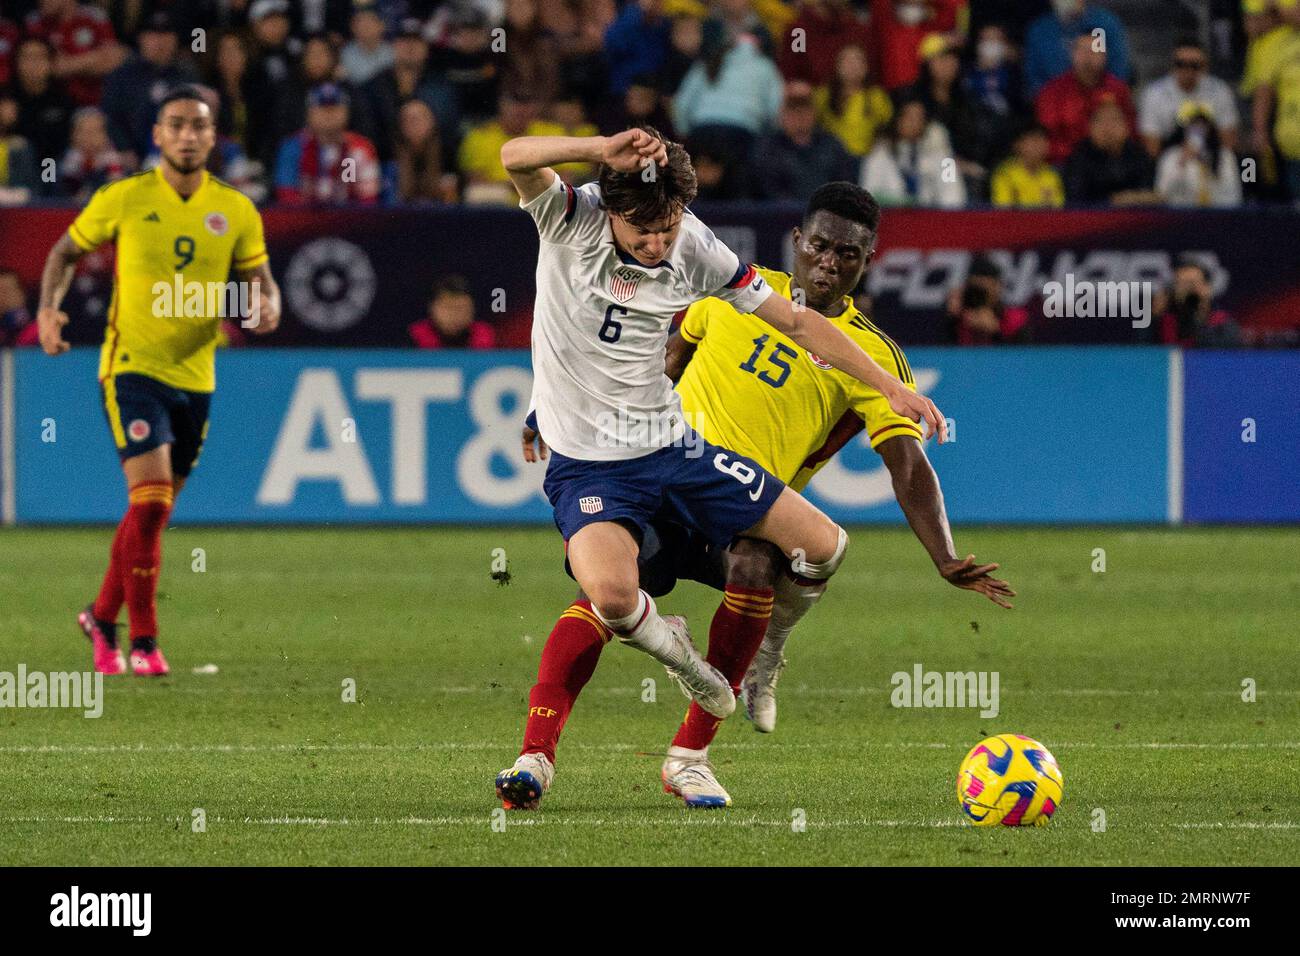 United States of America midfielder Paxten Aaronson (6) is fouled by Colombia midfielder Yilmar Velasquez (15) during an international friendly match, Stock Photo